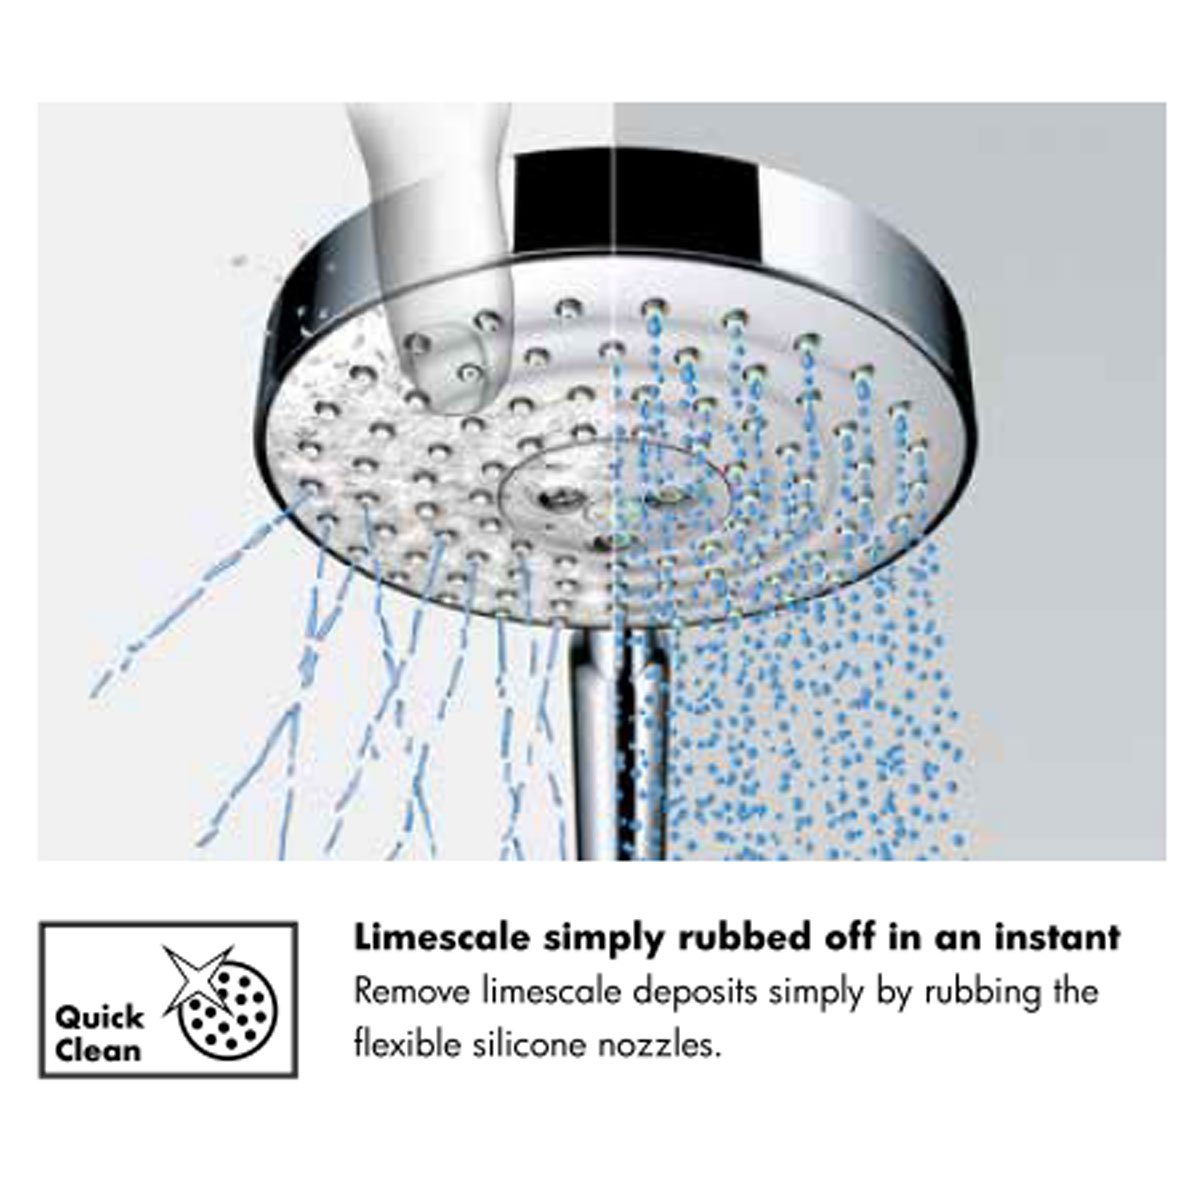 Hansgrohe quick clean technology